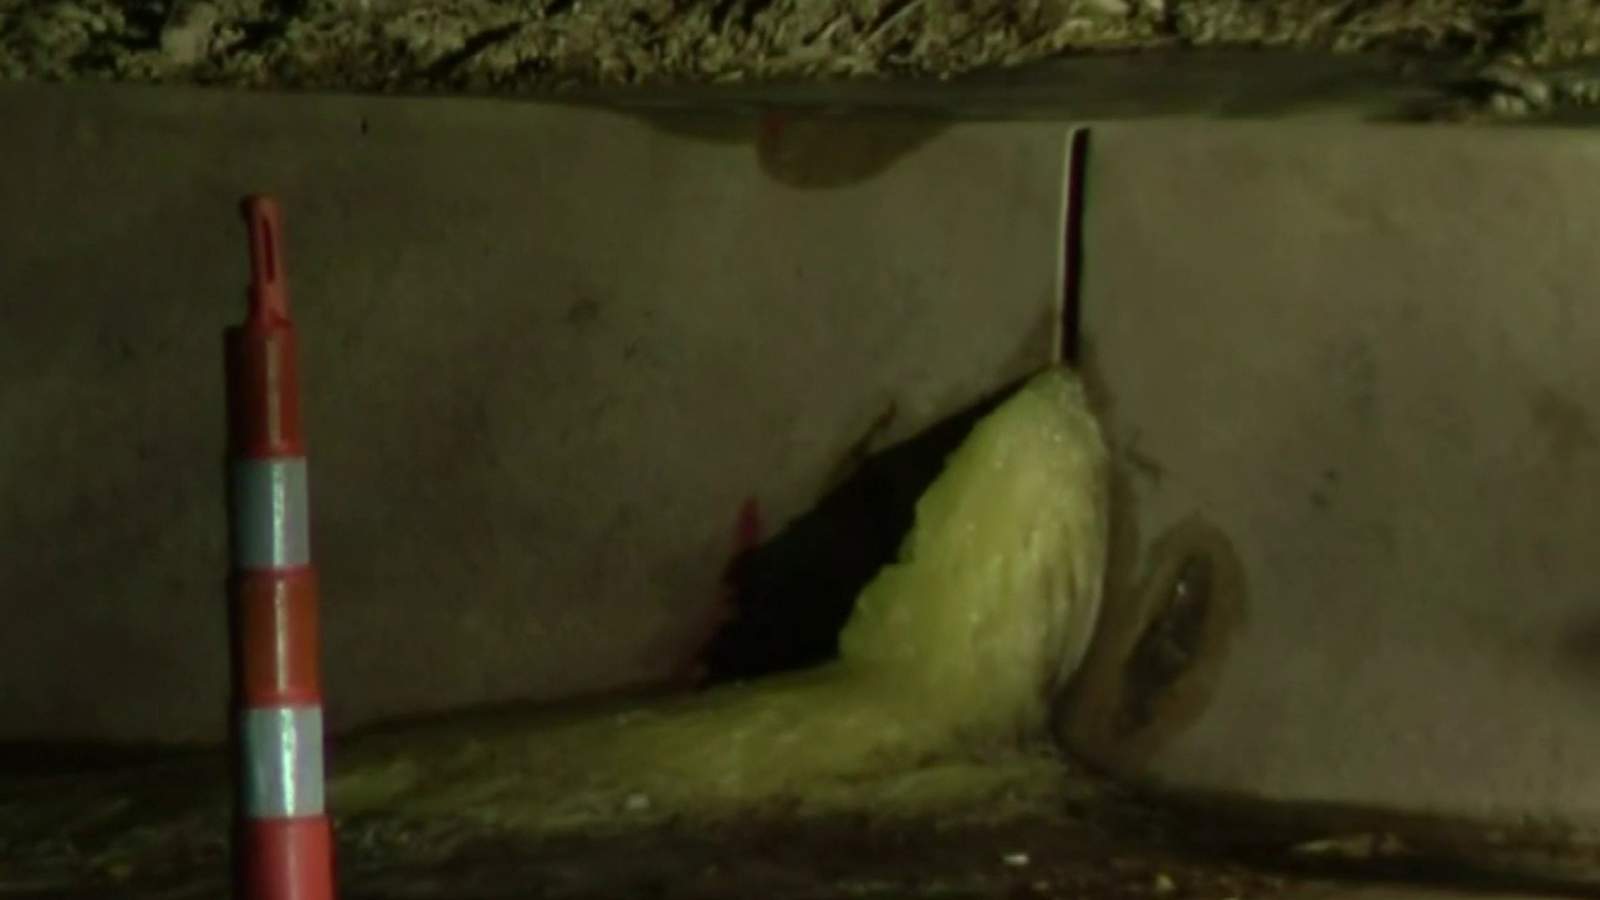 Here’s everything we know about the green substance found seeping onto I-696